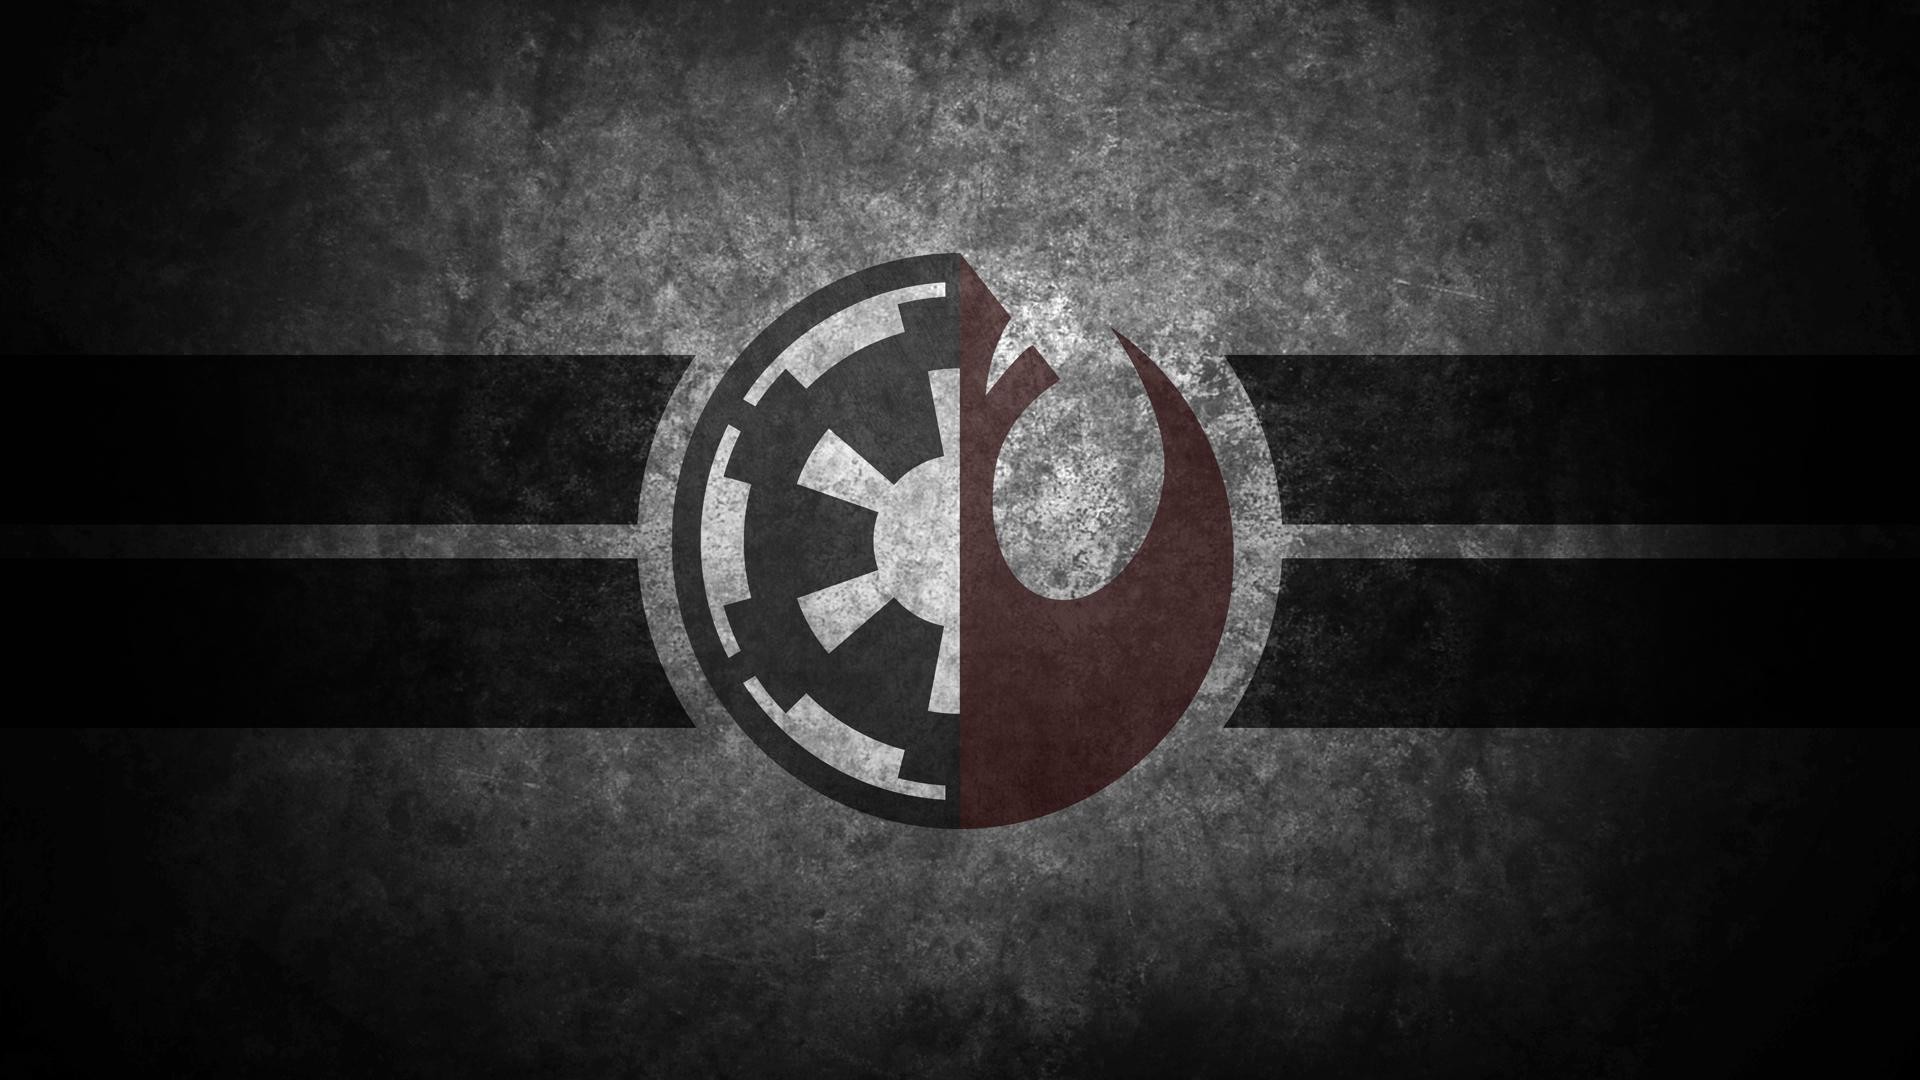 1920x1080 ... best star wars logo wallpapers free images ...